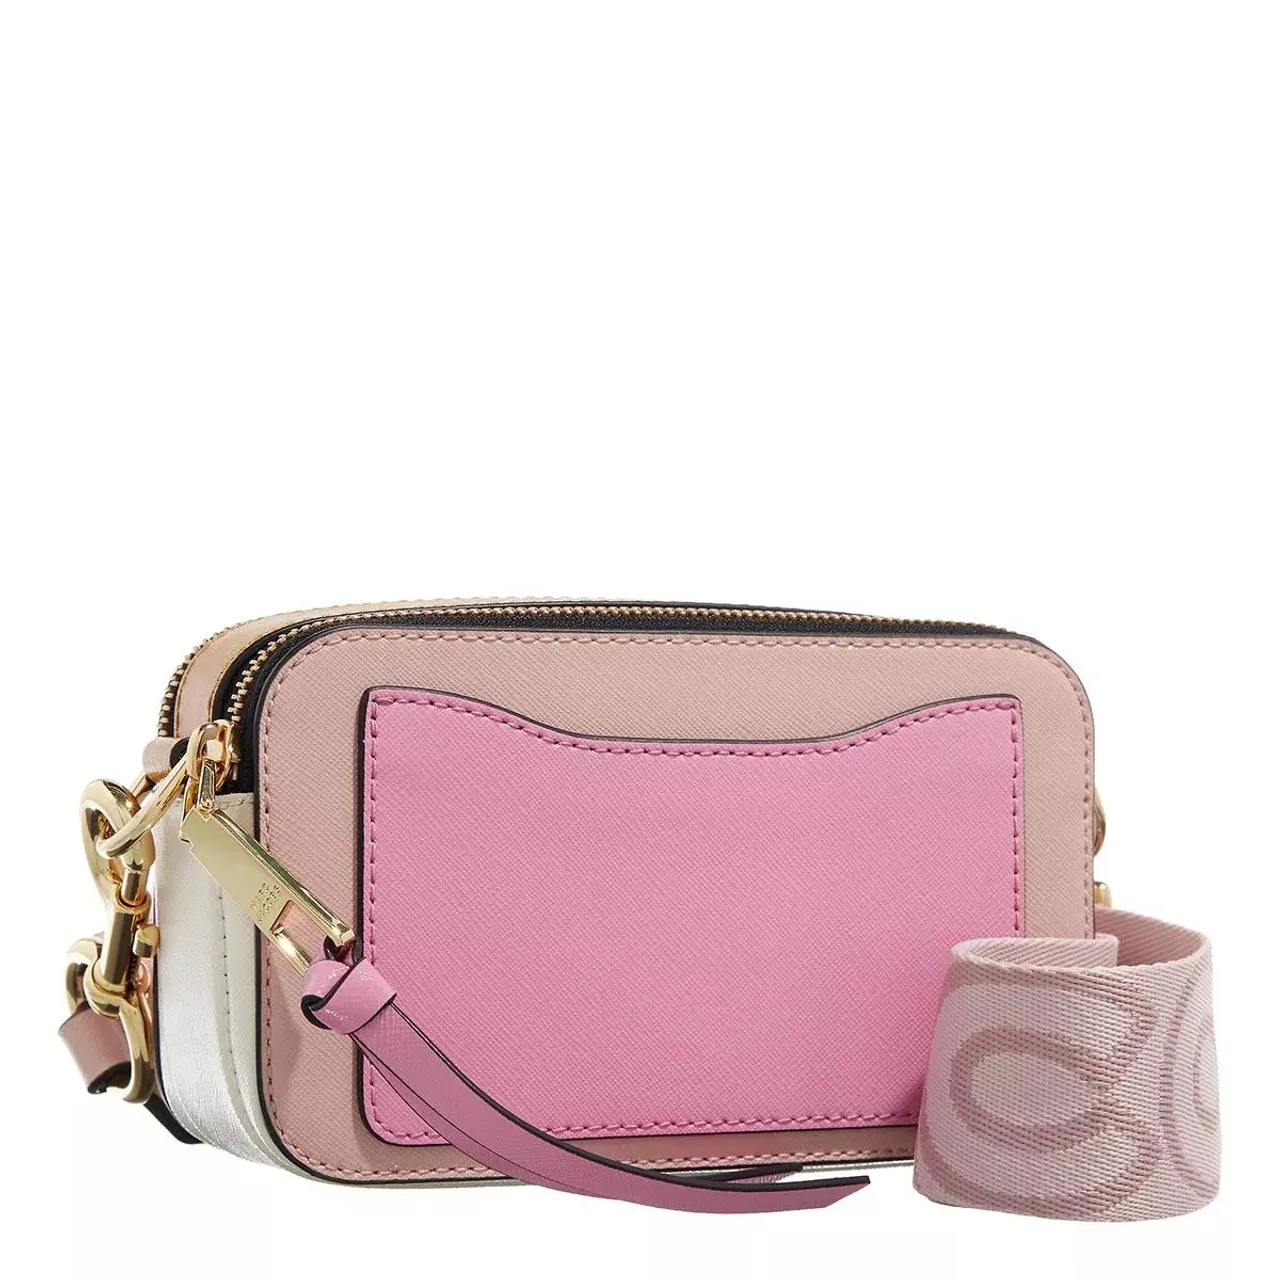 Marc Jacobs Crossbody Bags - The Snapshot - pink - Crossbody Bags for ladies